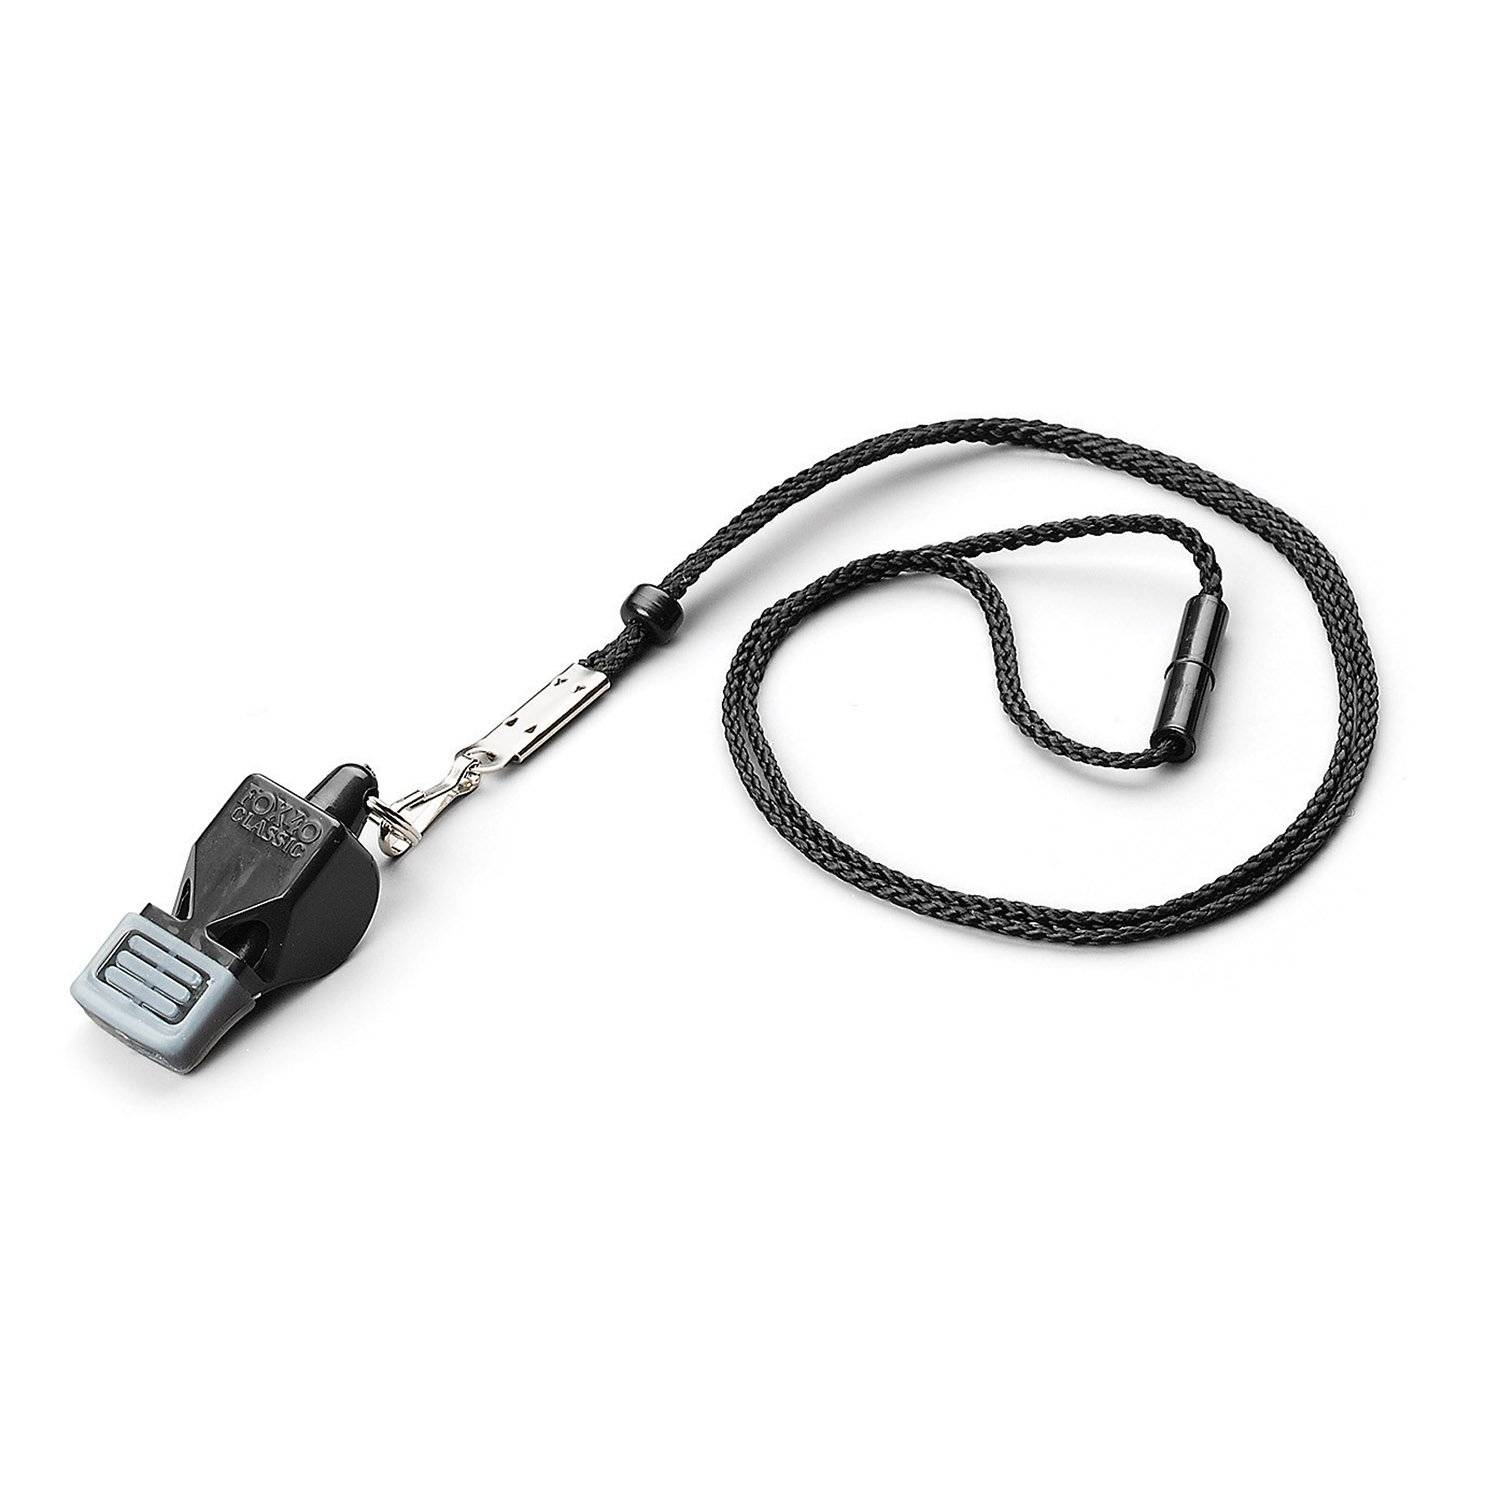 POLICE-SECURITY WHISTLE with rubber mouth guard & lanyard TRAFFIC PUBLIC SAFETY 